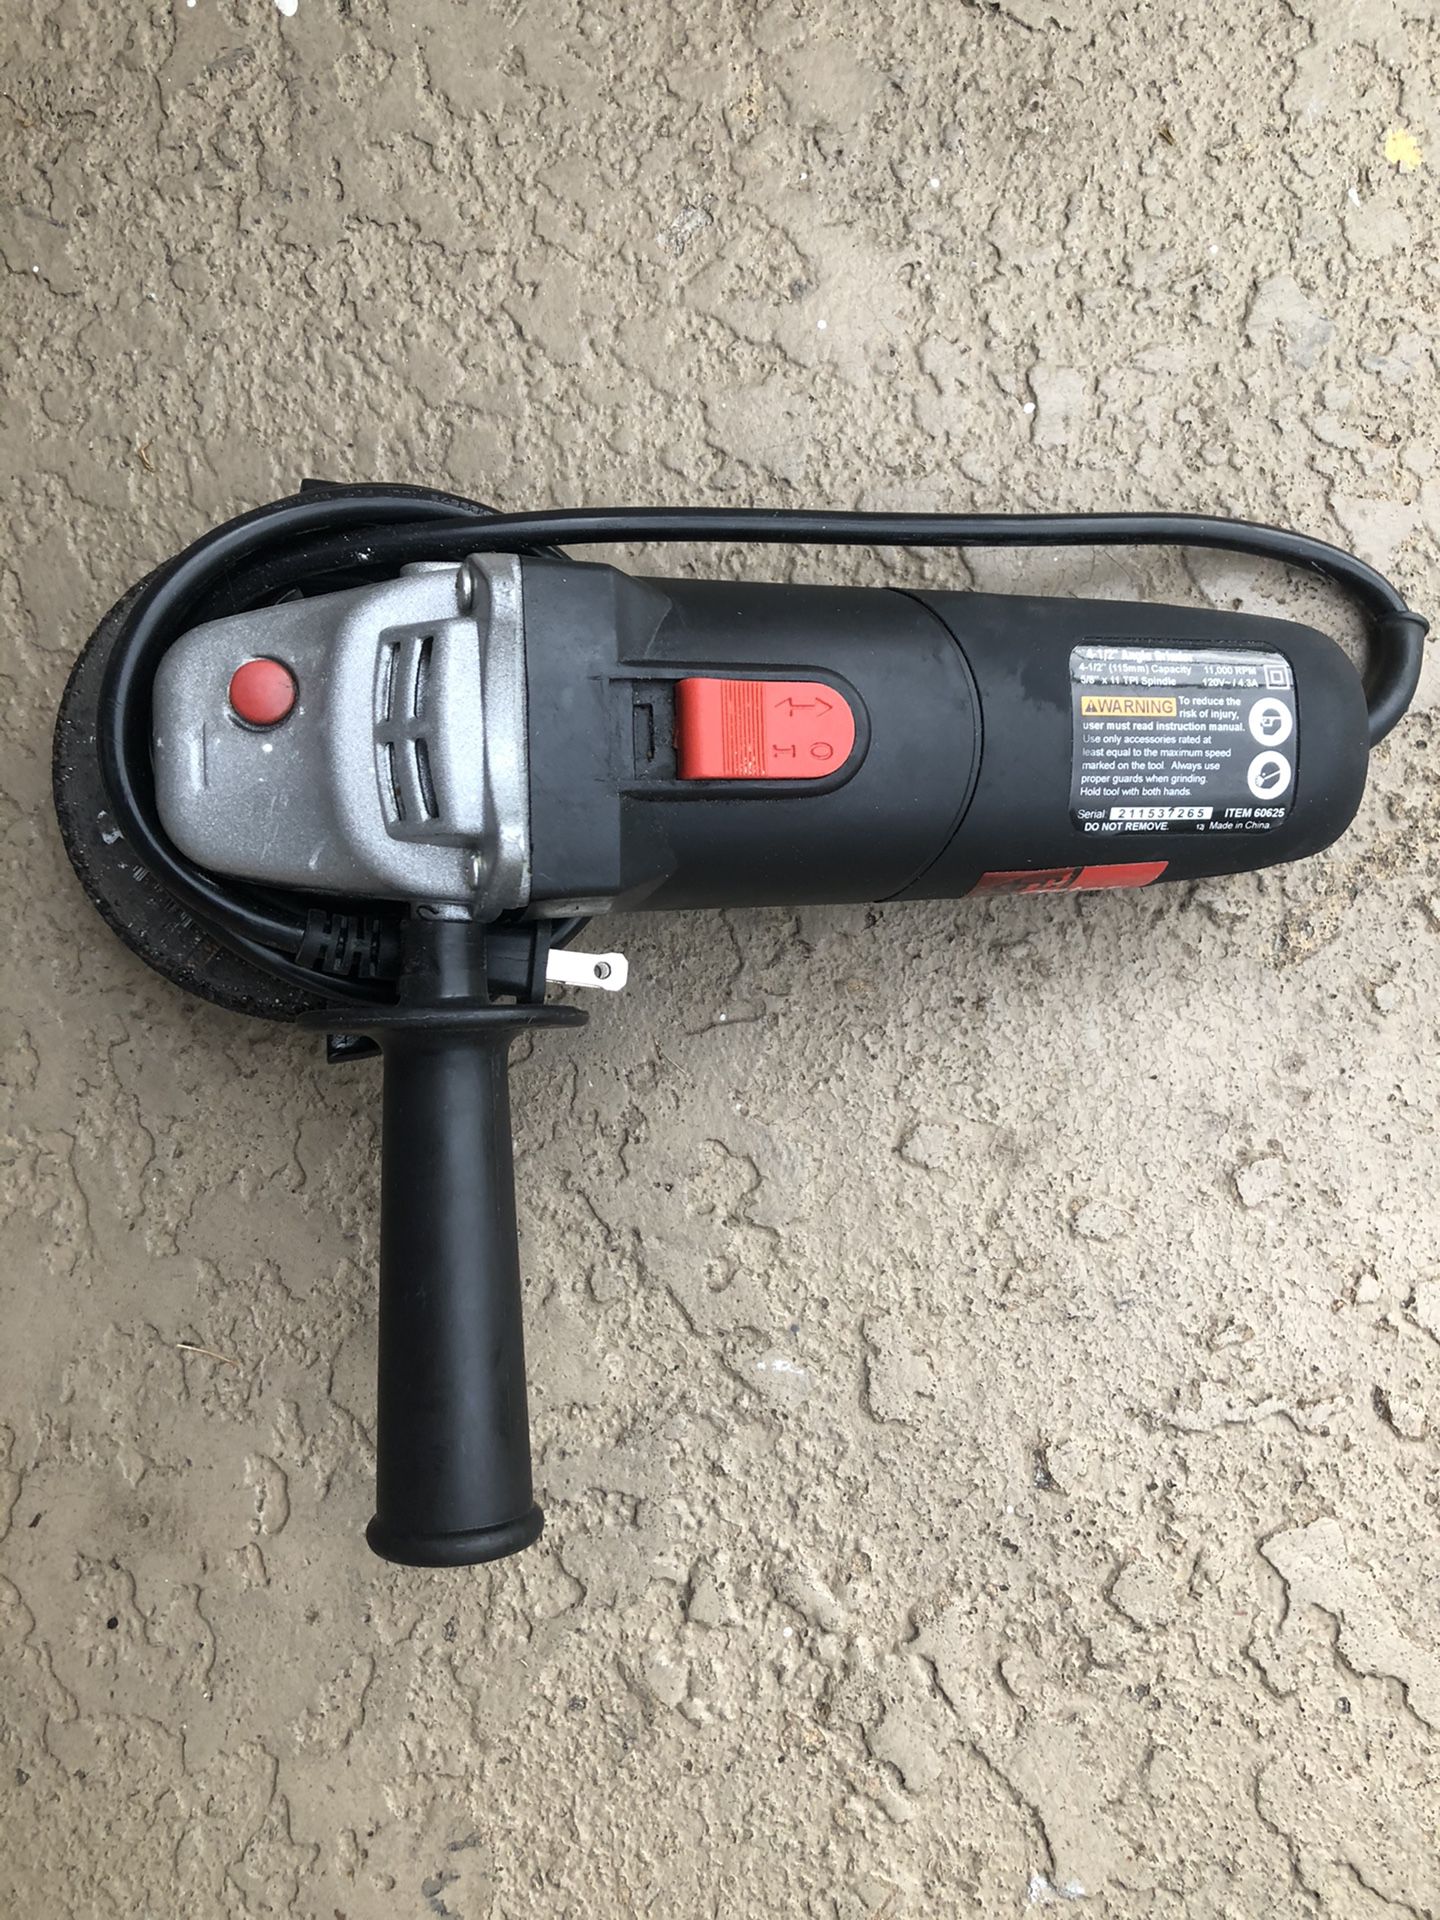 Drill Master angle grinder